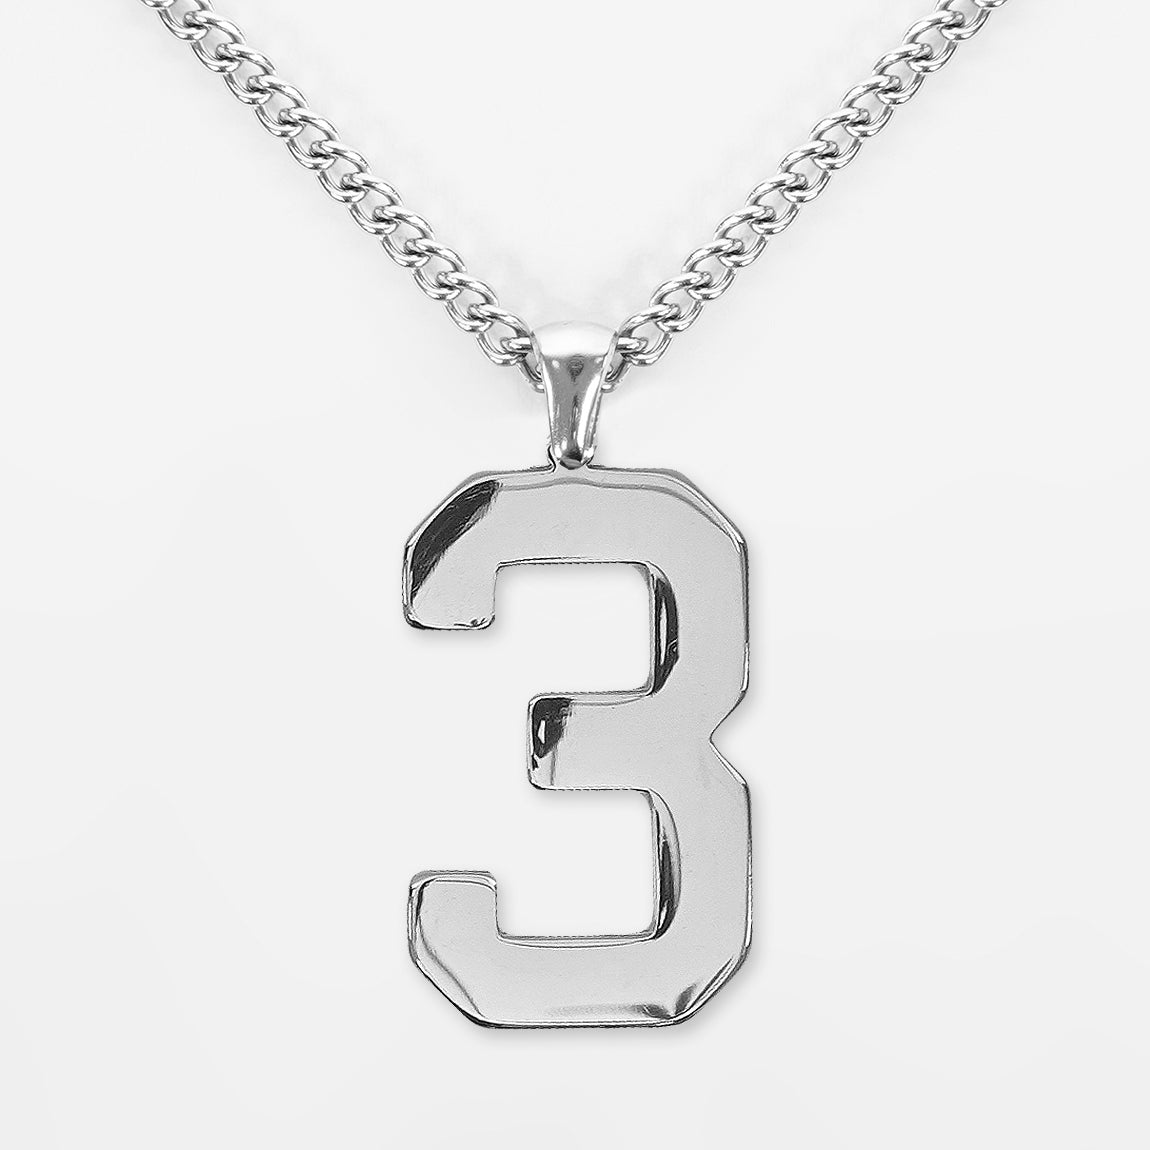 3 Number Pendant with Chain Necklace - Stainless Steel